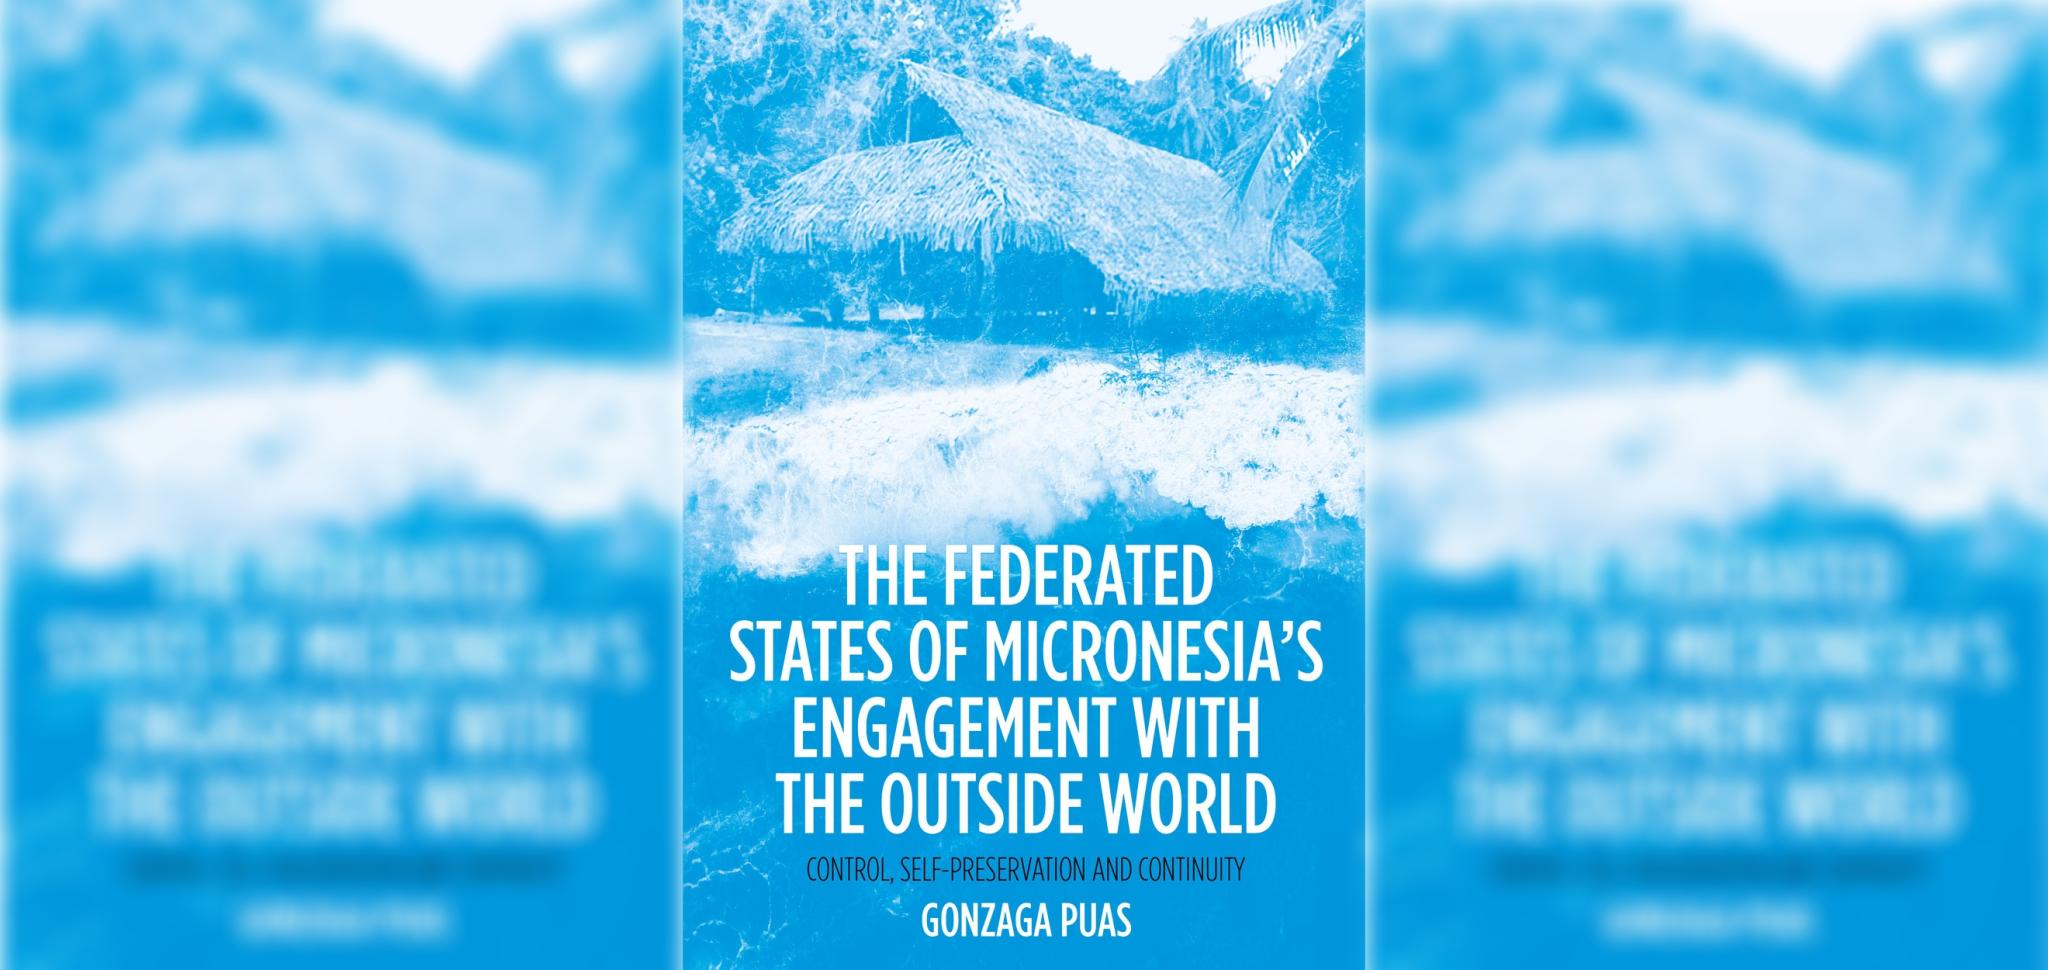 The Federated States of Micronesia’s Engagement with the Outside World